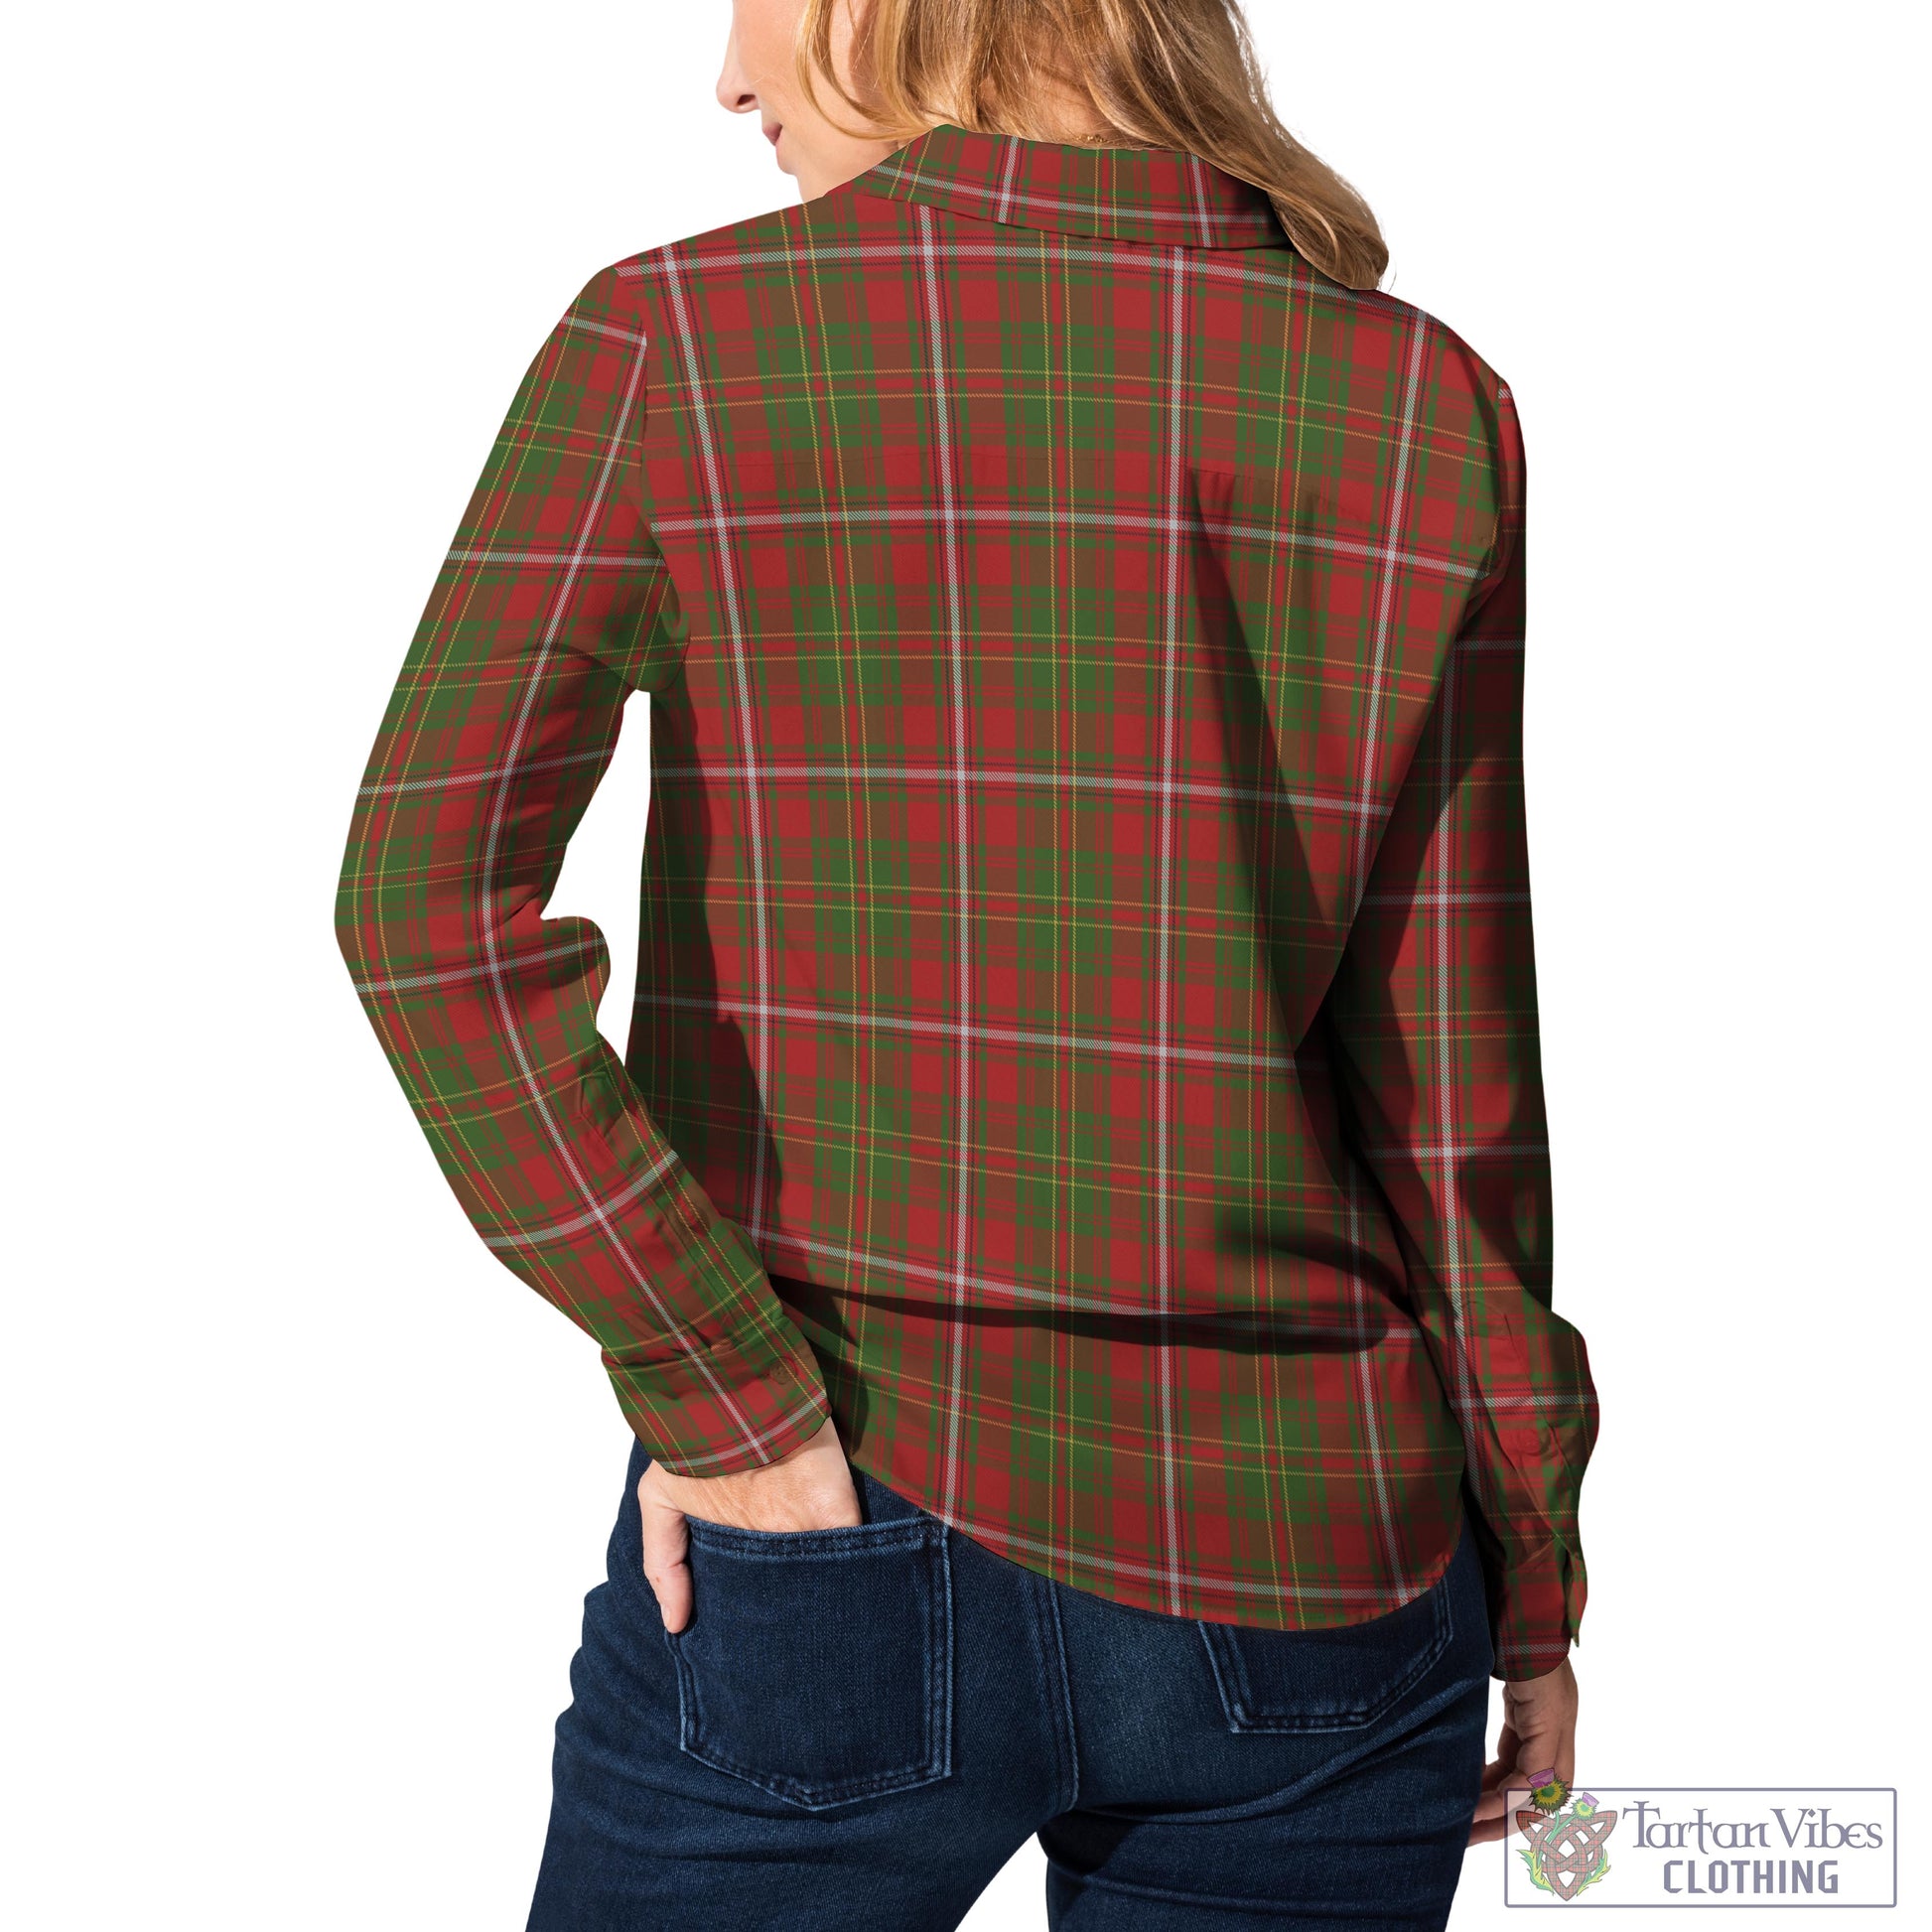 Tartan Vibes Clothing Hay Tartan Womens Casual Shirt with Family Crest